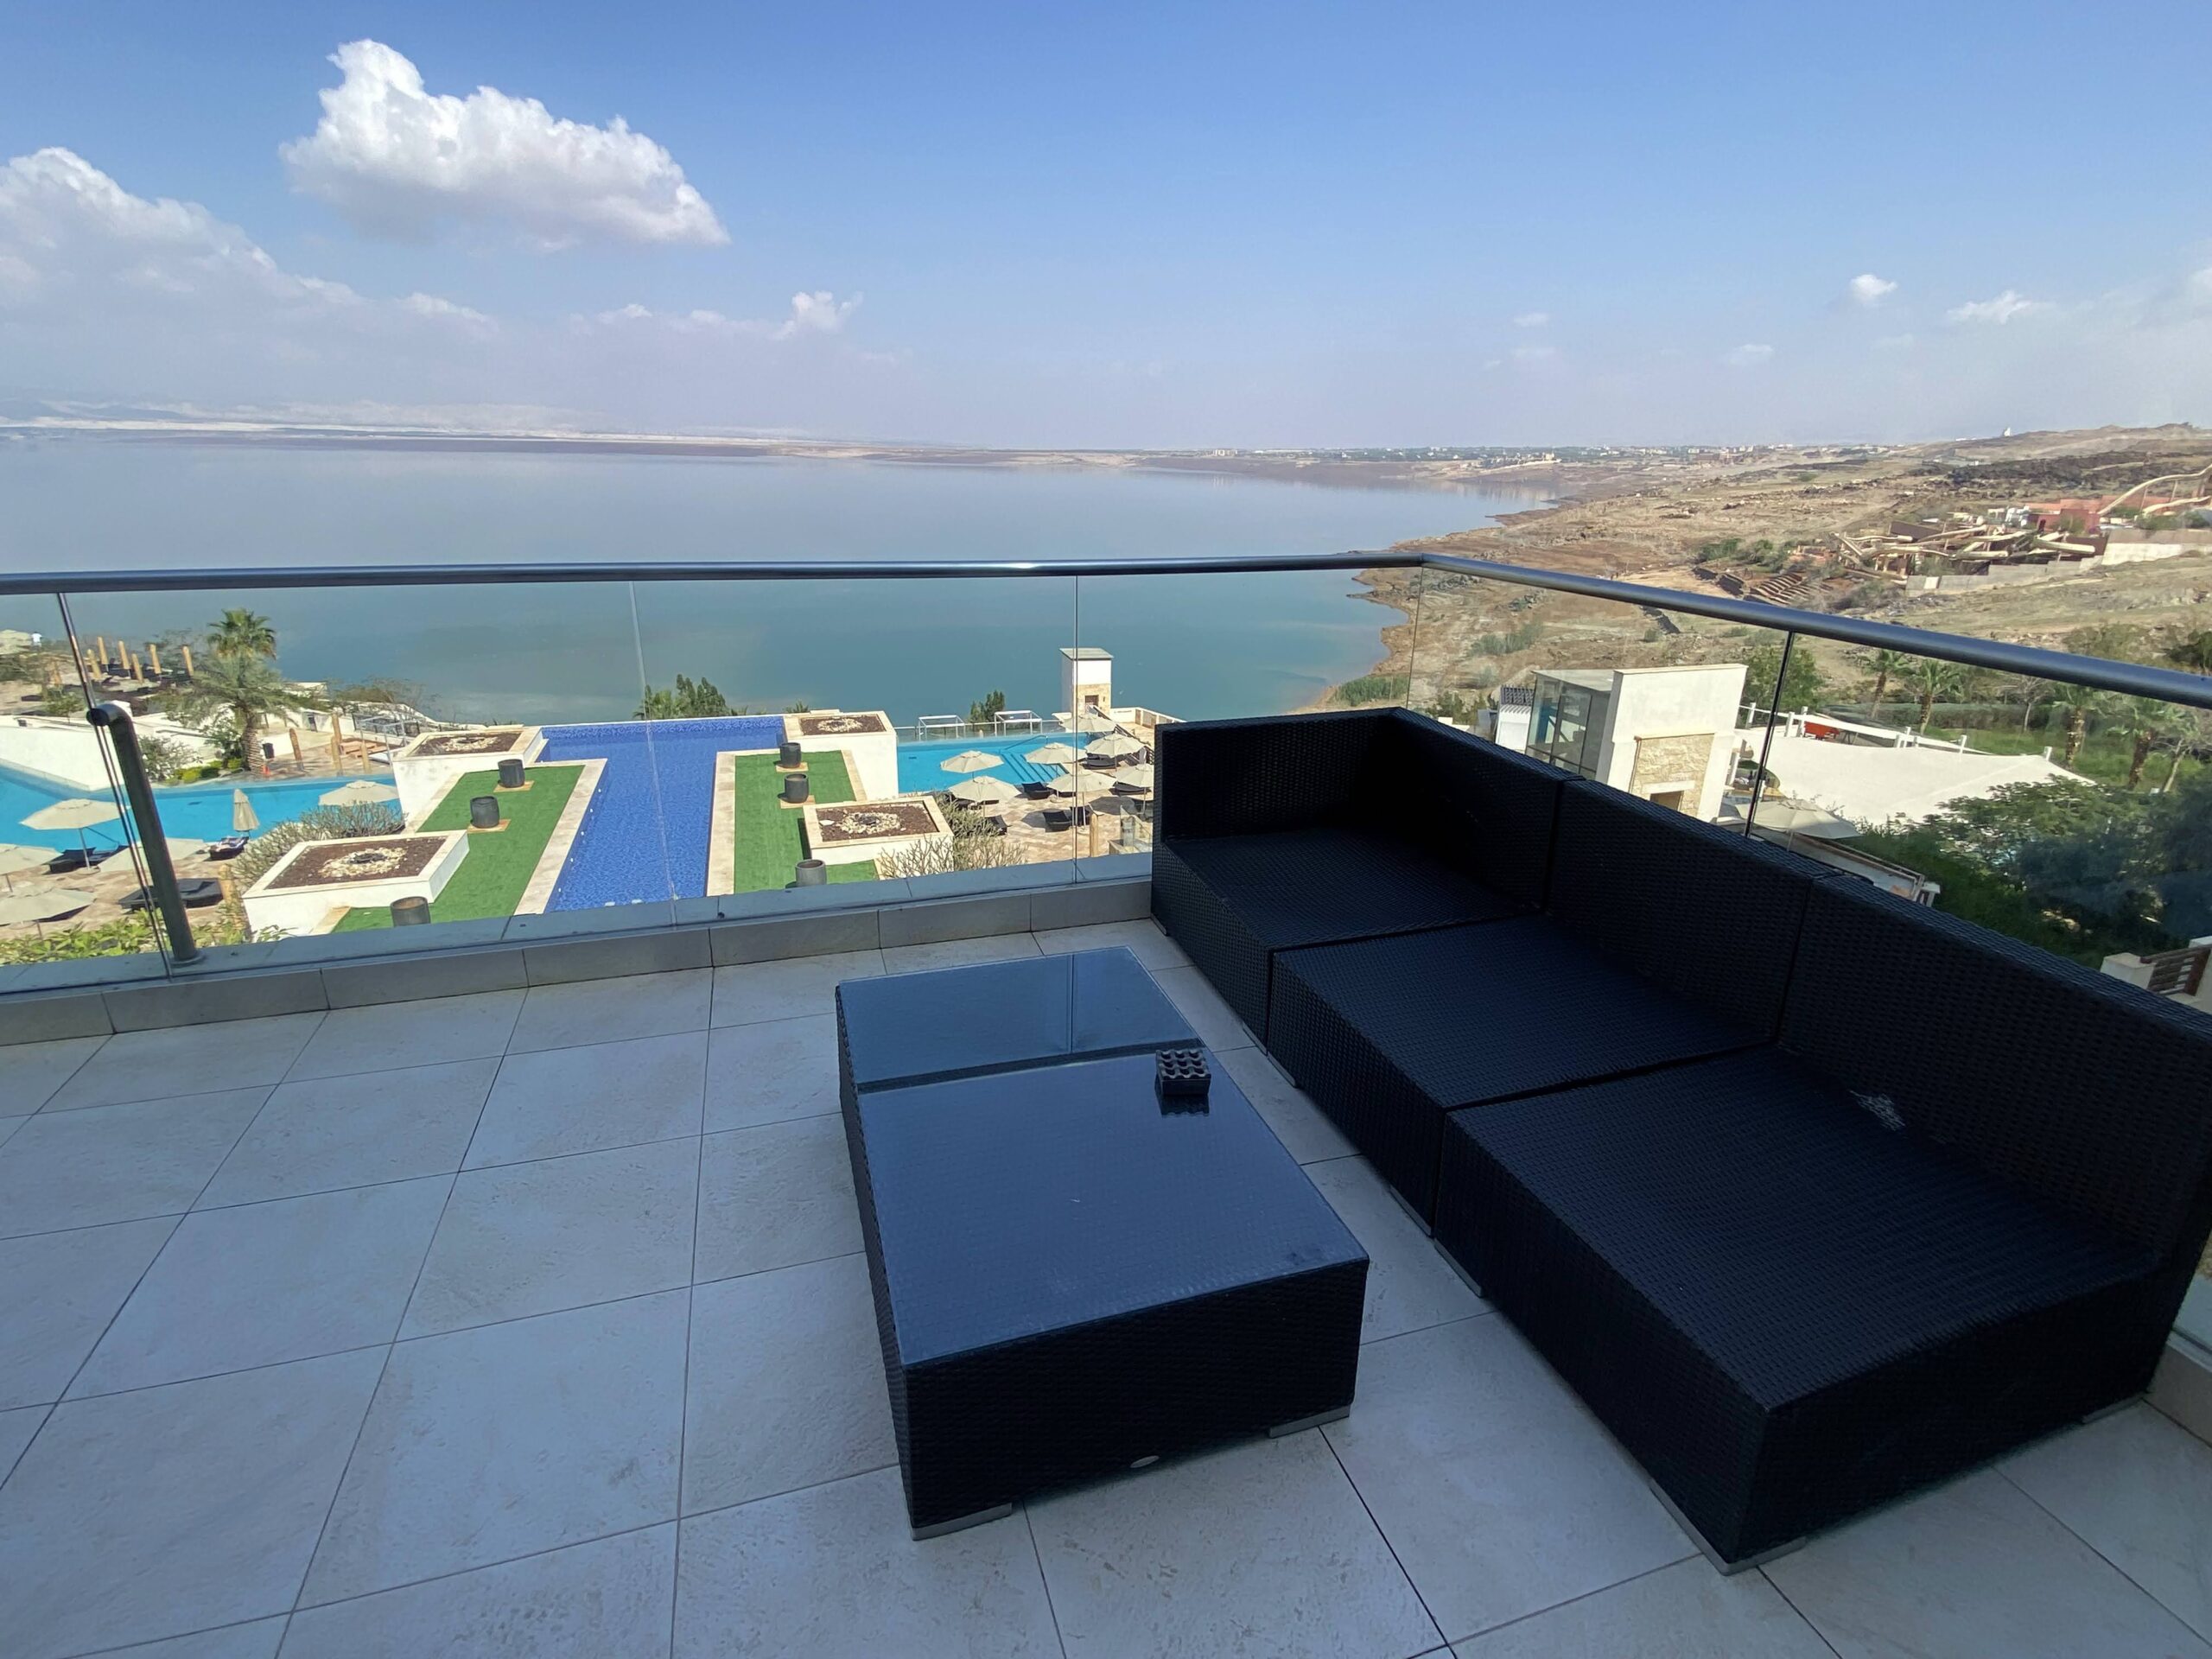 a couches on a balcony overlooking a body of water